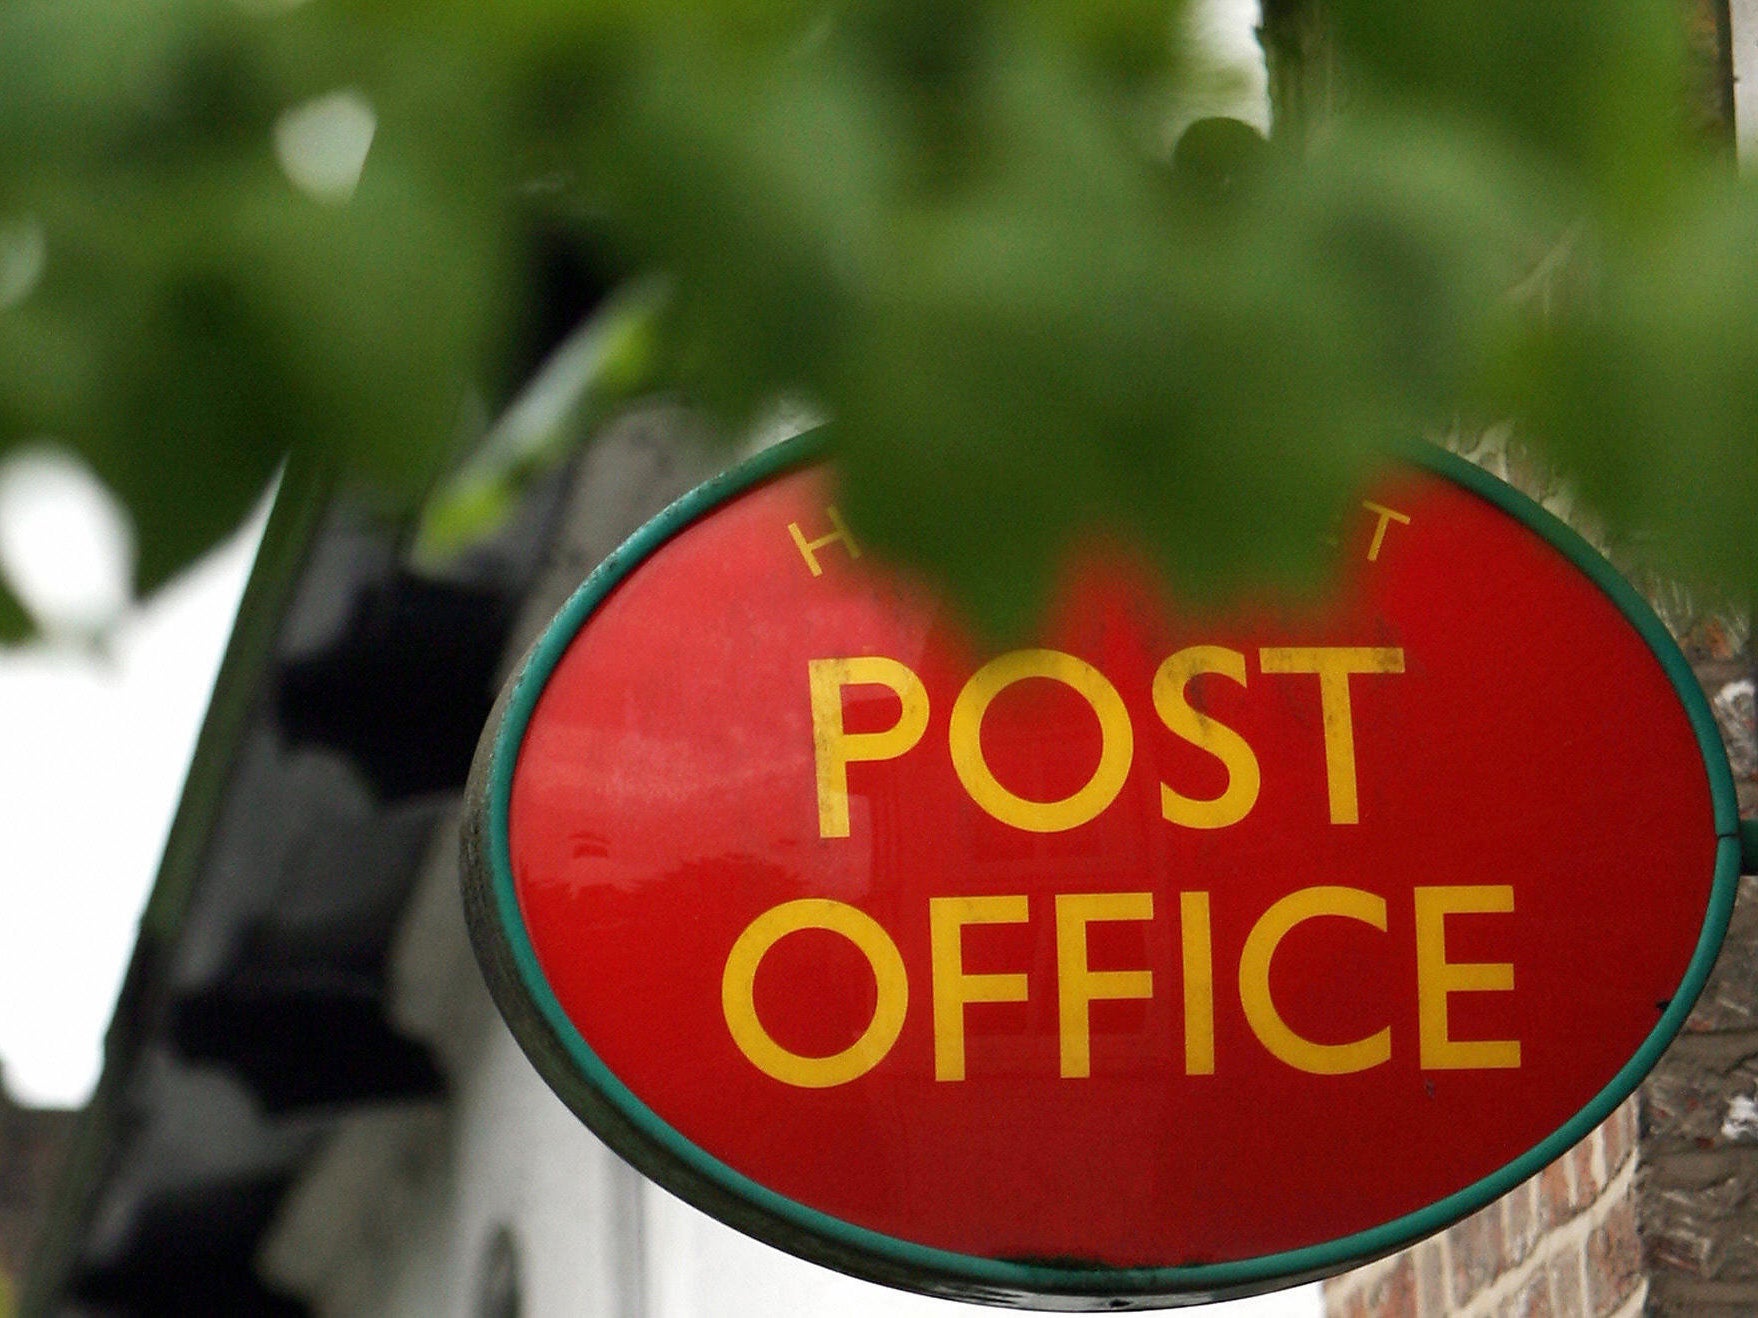 The Post Office provides the stamps (alongside banking and bill payment services) for the letters delivered by Royal Mail, which floated on the stock exchange in 2012. The same act that privatised Royal Mail also contained the option for the Postal Servic